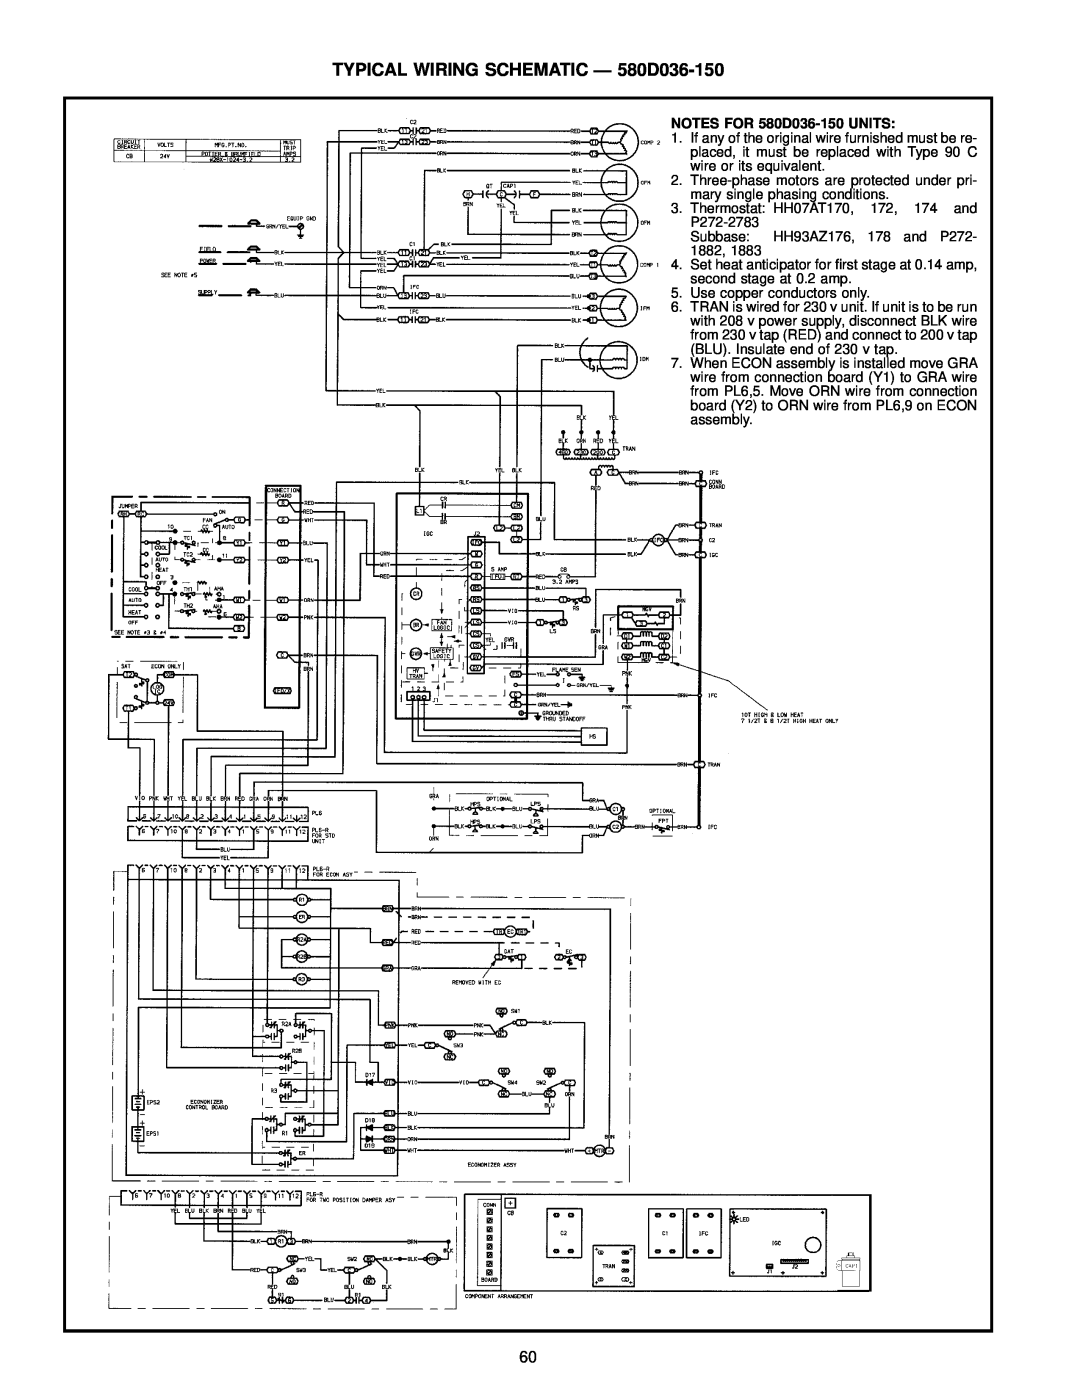 Bryant manual TYPICAL WIRING SCHEMATIC Ð 580D036-150, NOTES FOR 580D036-150UNITS 